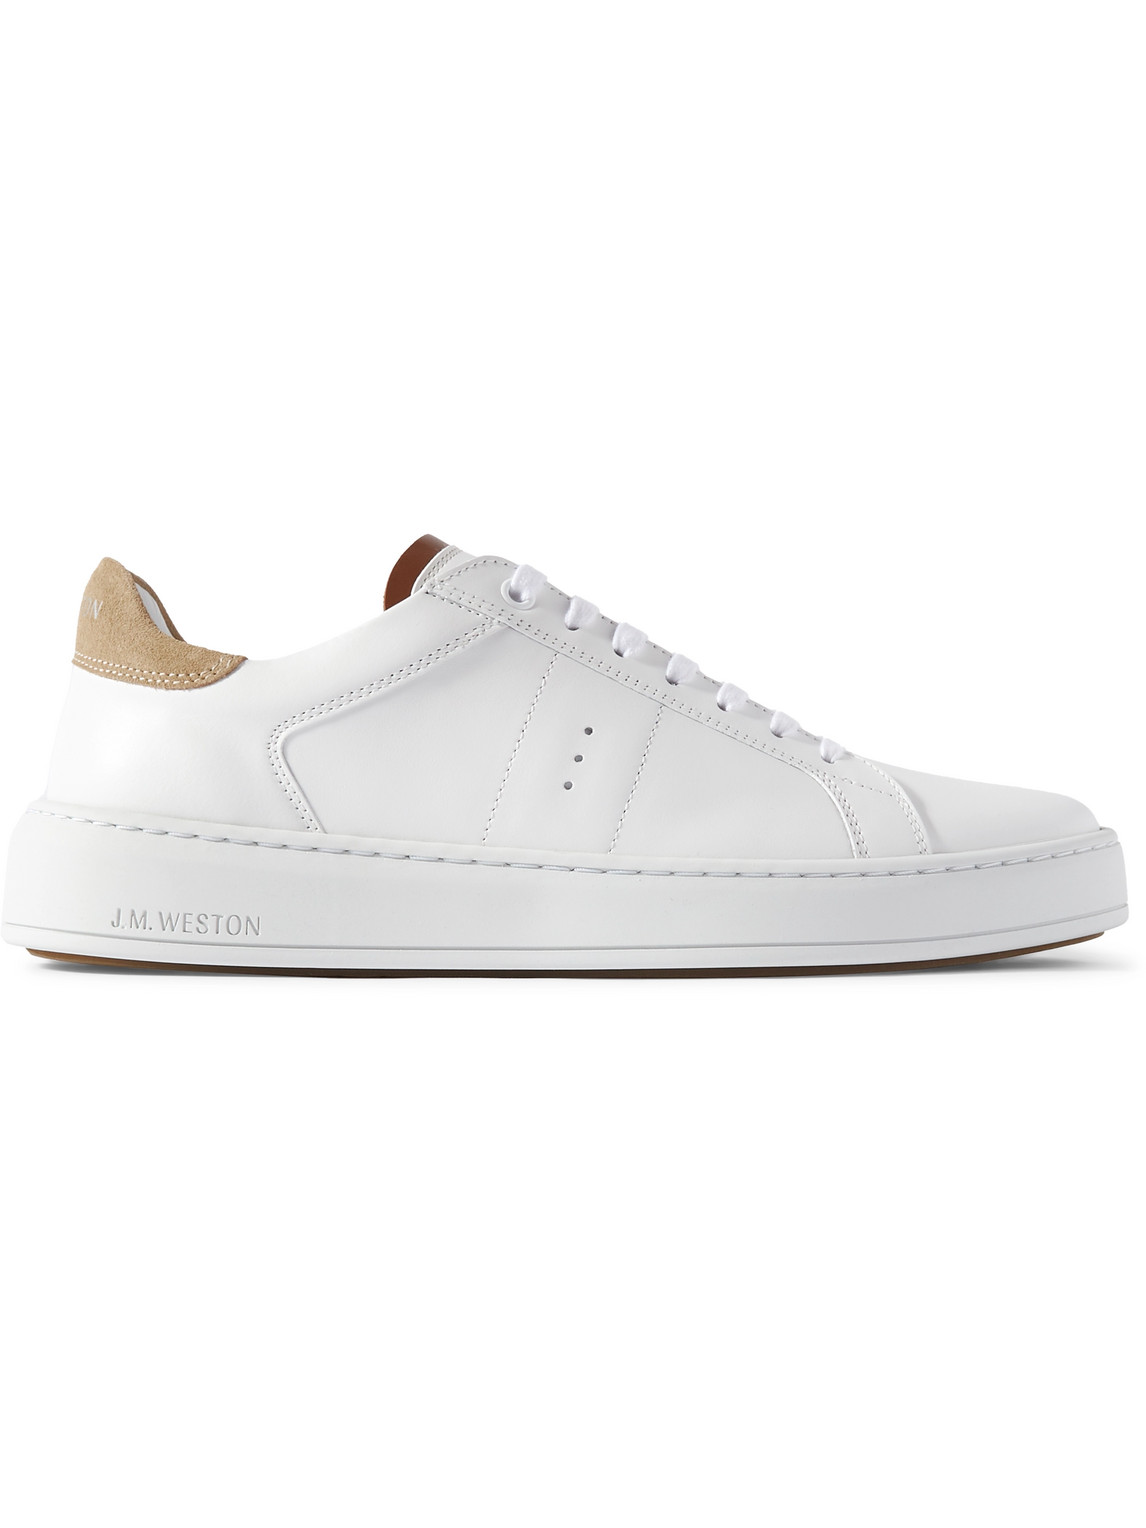 J.M. Weston On Time Suede-Trimmed Leather Sneakers